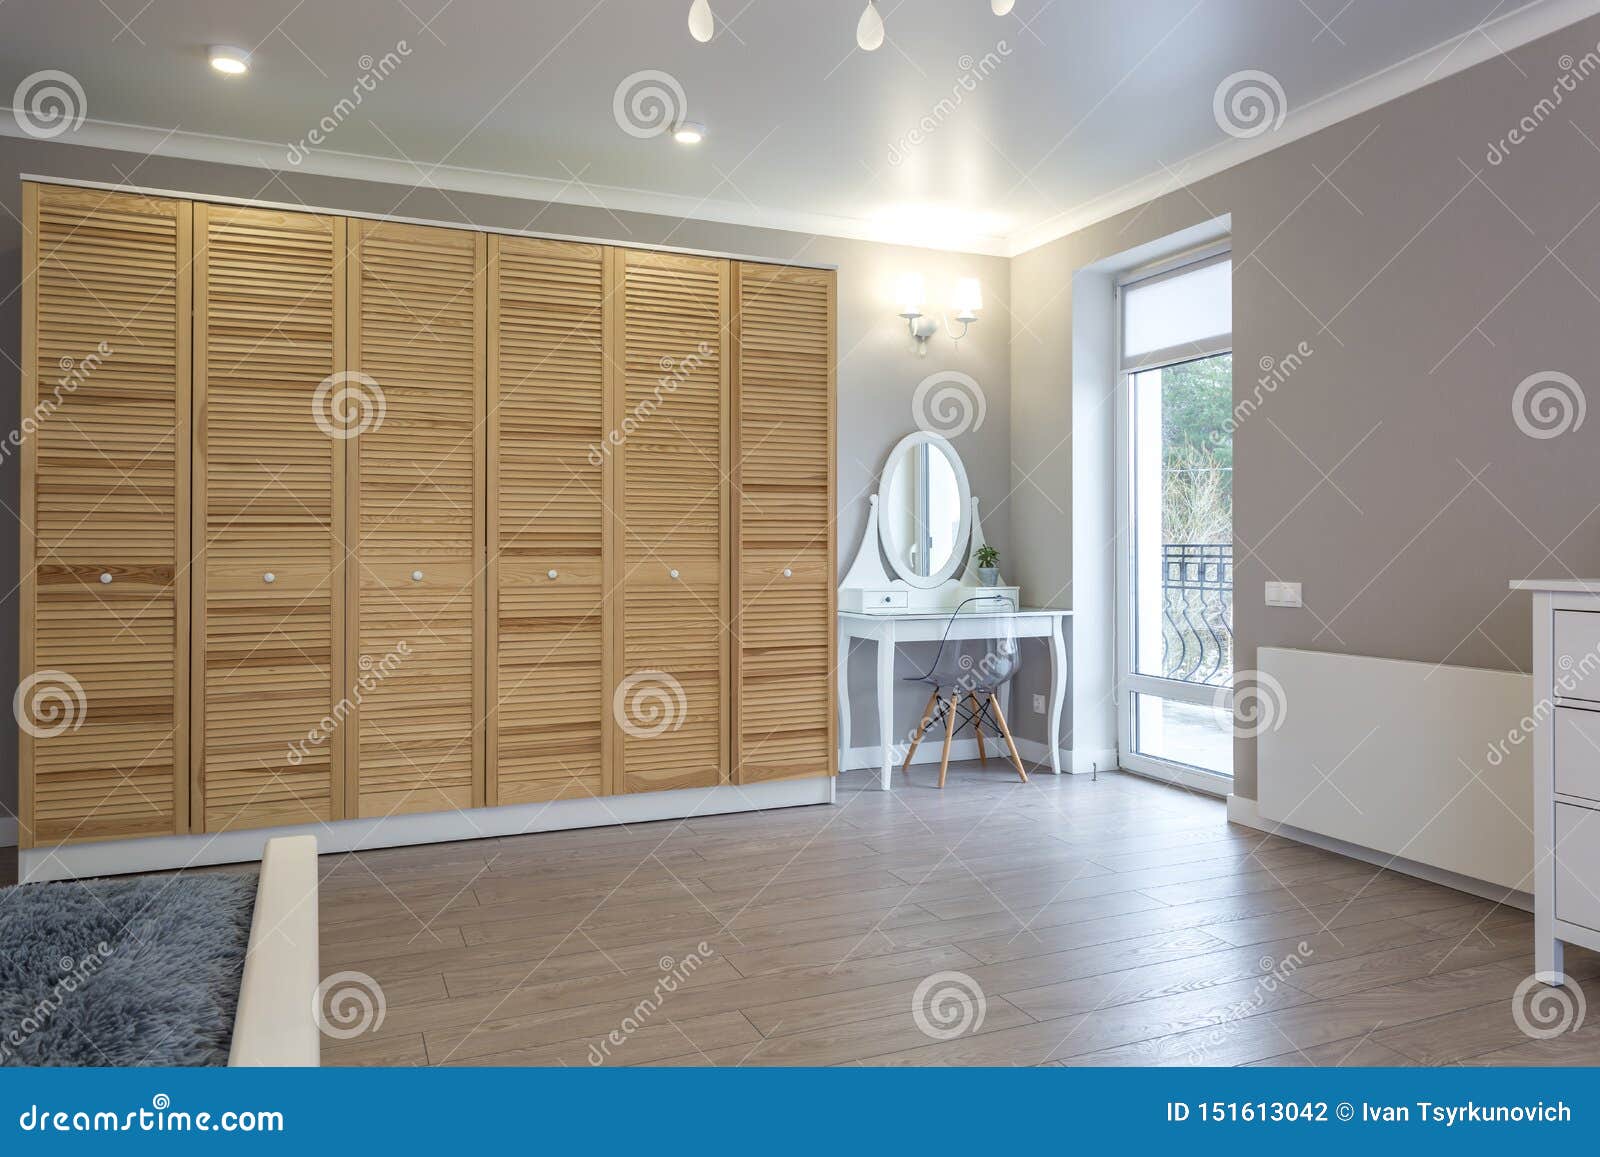 Wardrobe Made Of Thin Wooden Planks In Apartment Room Ecological